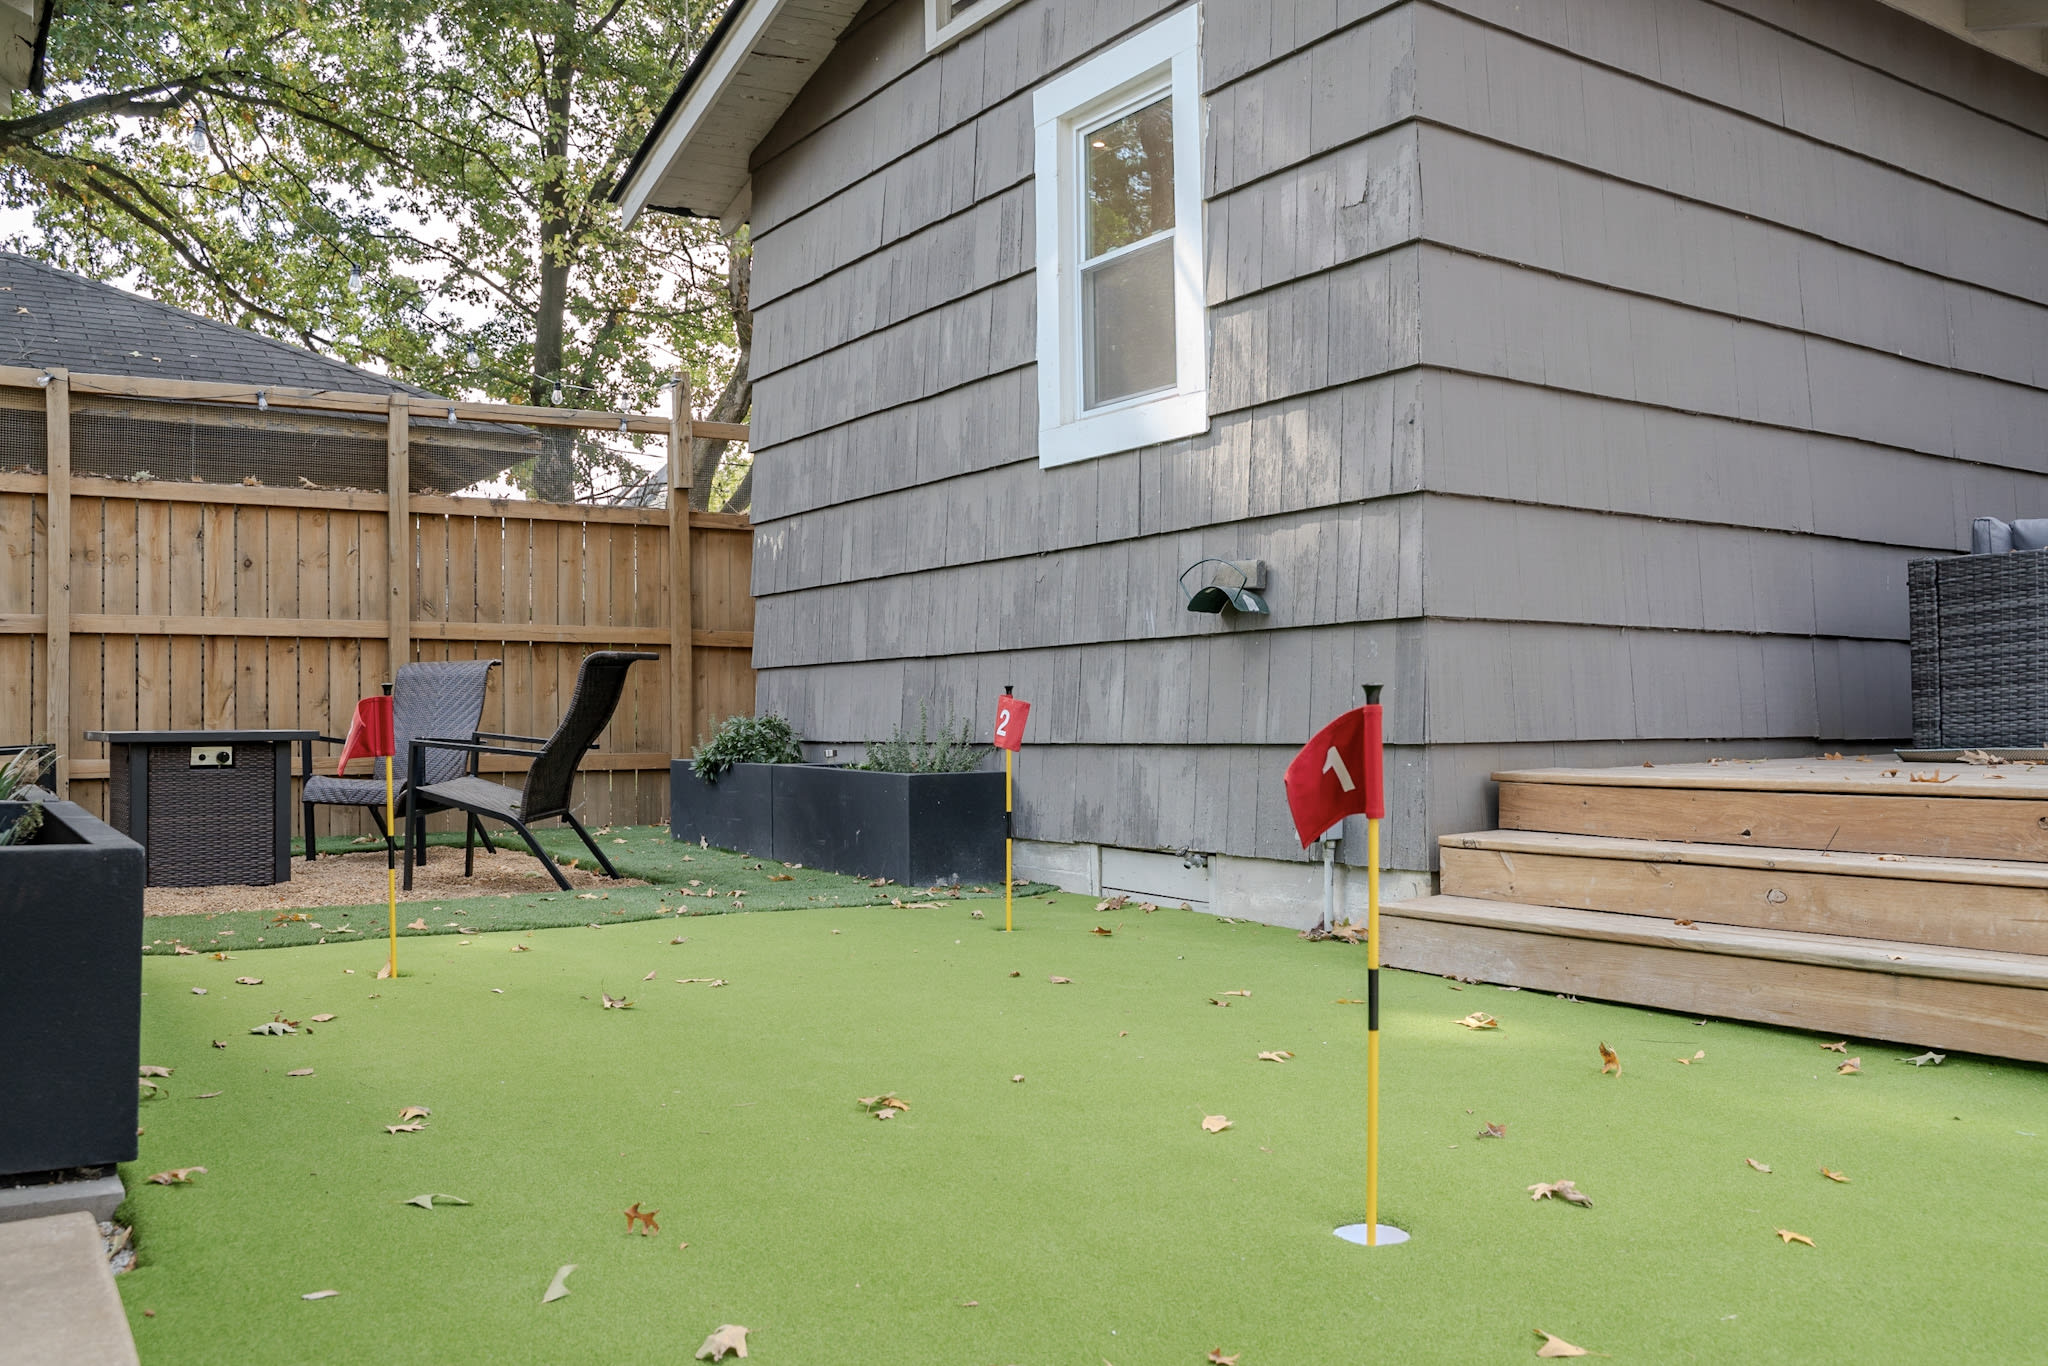 Play a game of putt putt on our professionally installed course